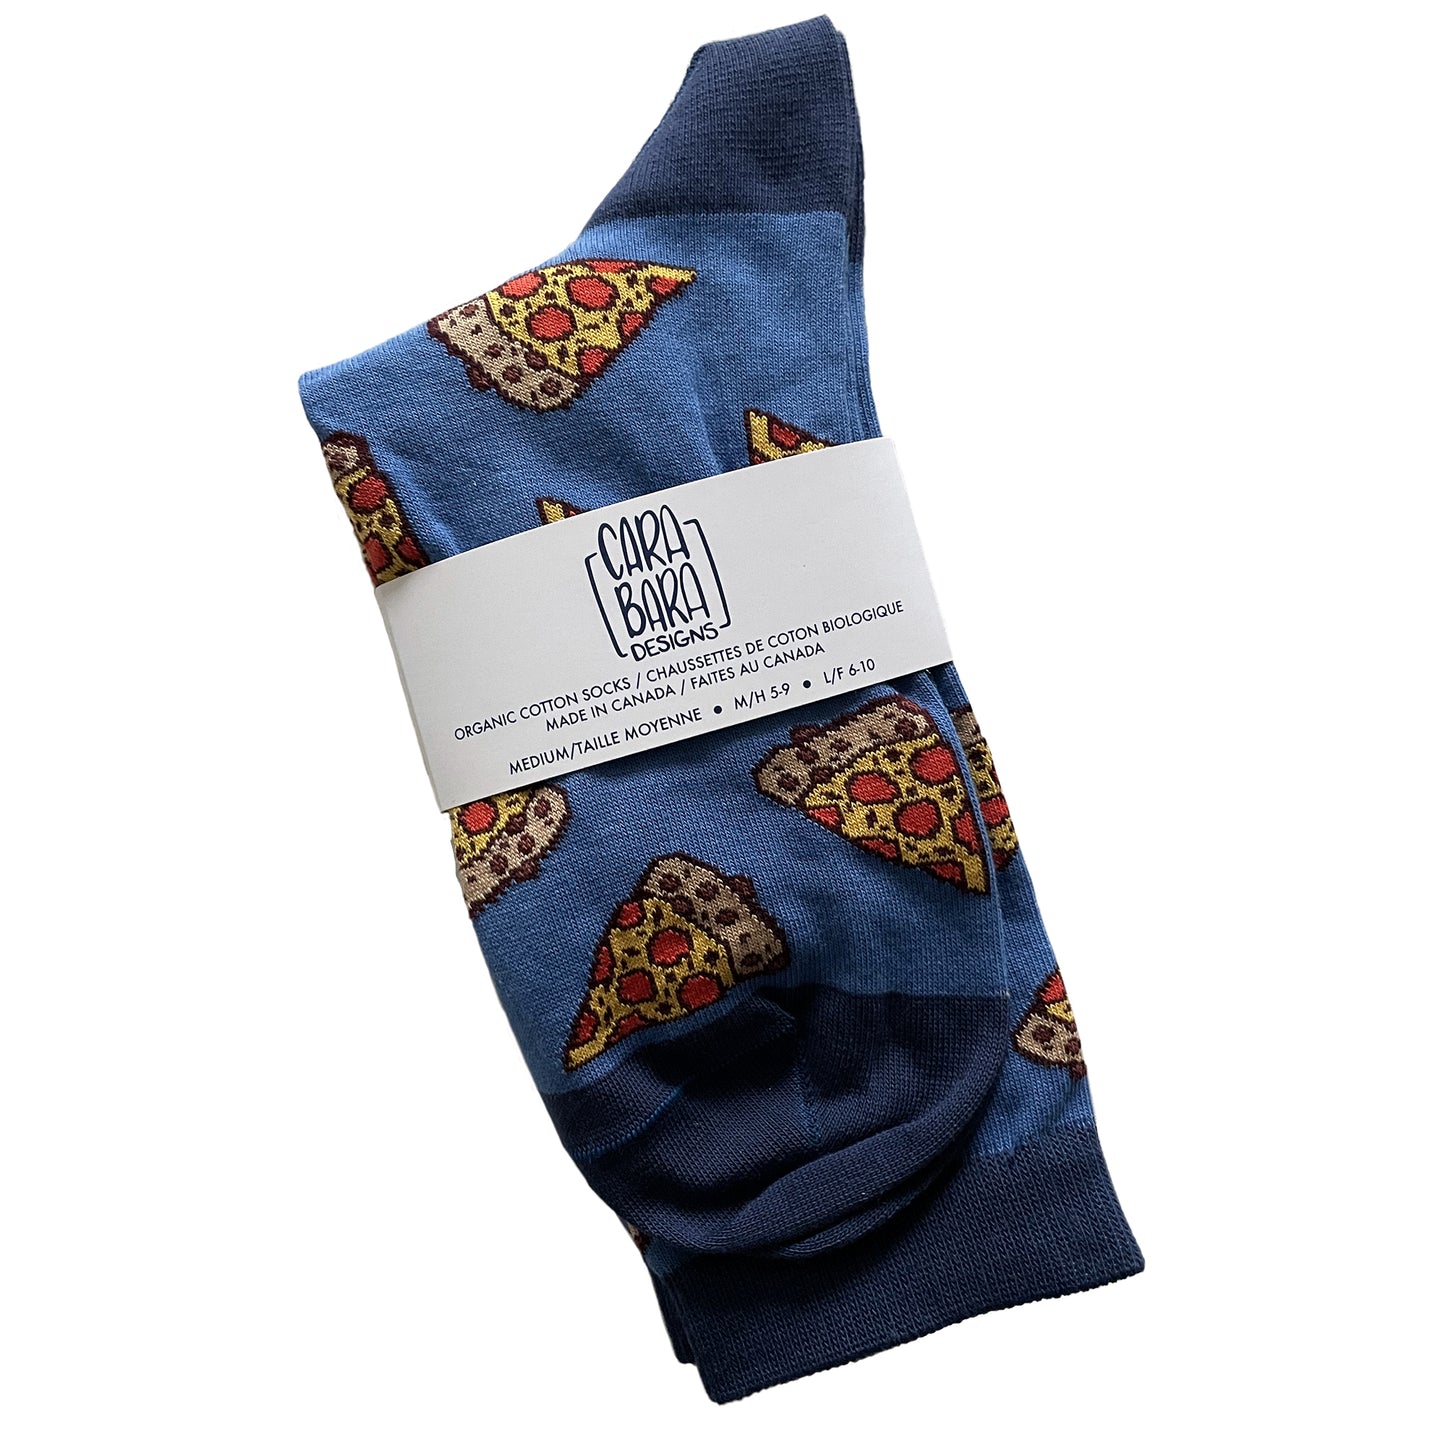 A blue pair of socks has darker blue accents is patterned with pizza slices. It is folded and labelled with a belly band with the Carabara Designs logo and the words organic cotton socks made in Canada, size medium, in English and French.